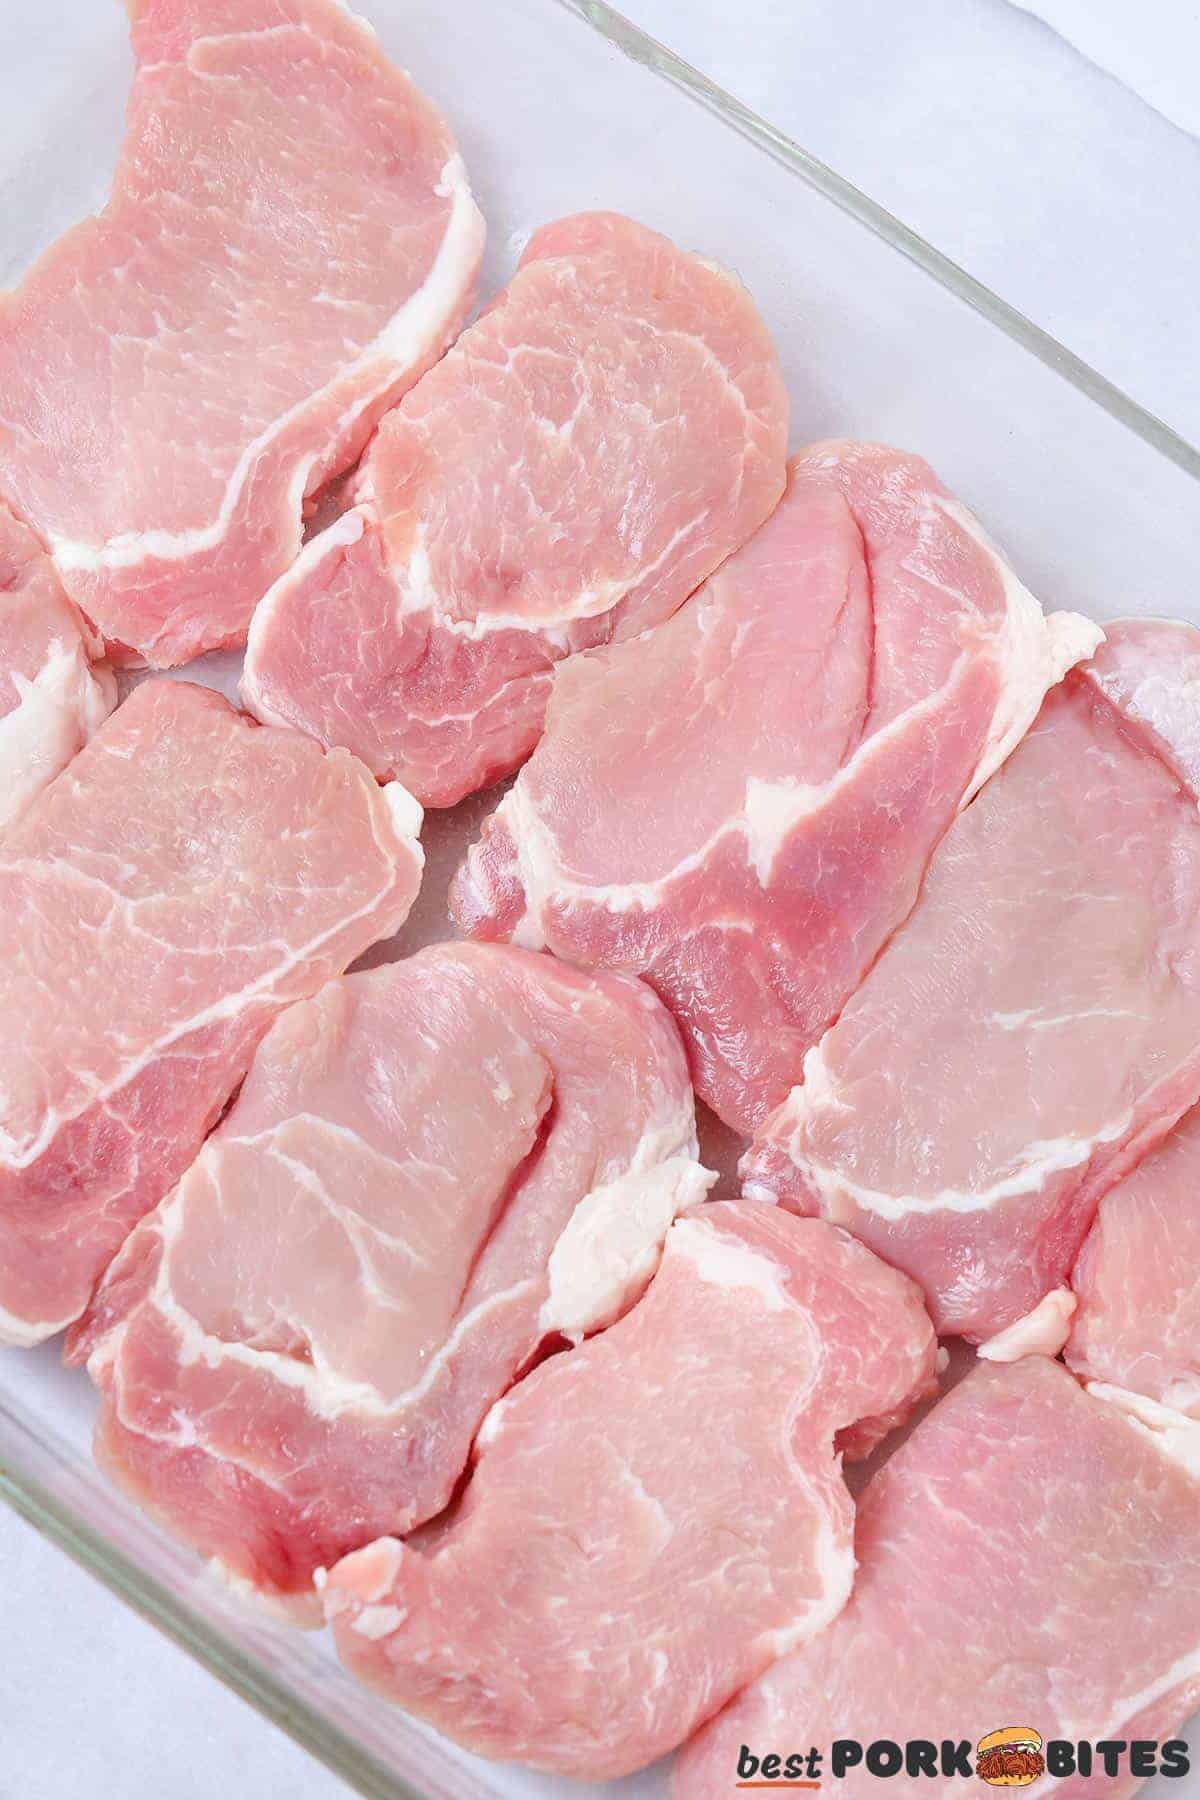 raw pork chops lined up in a glass dish